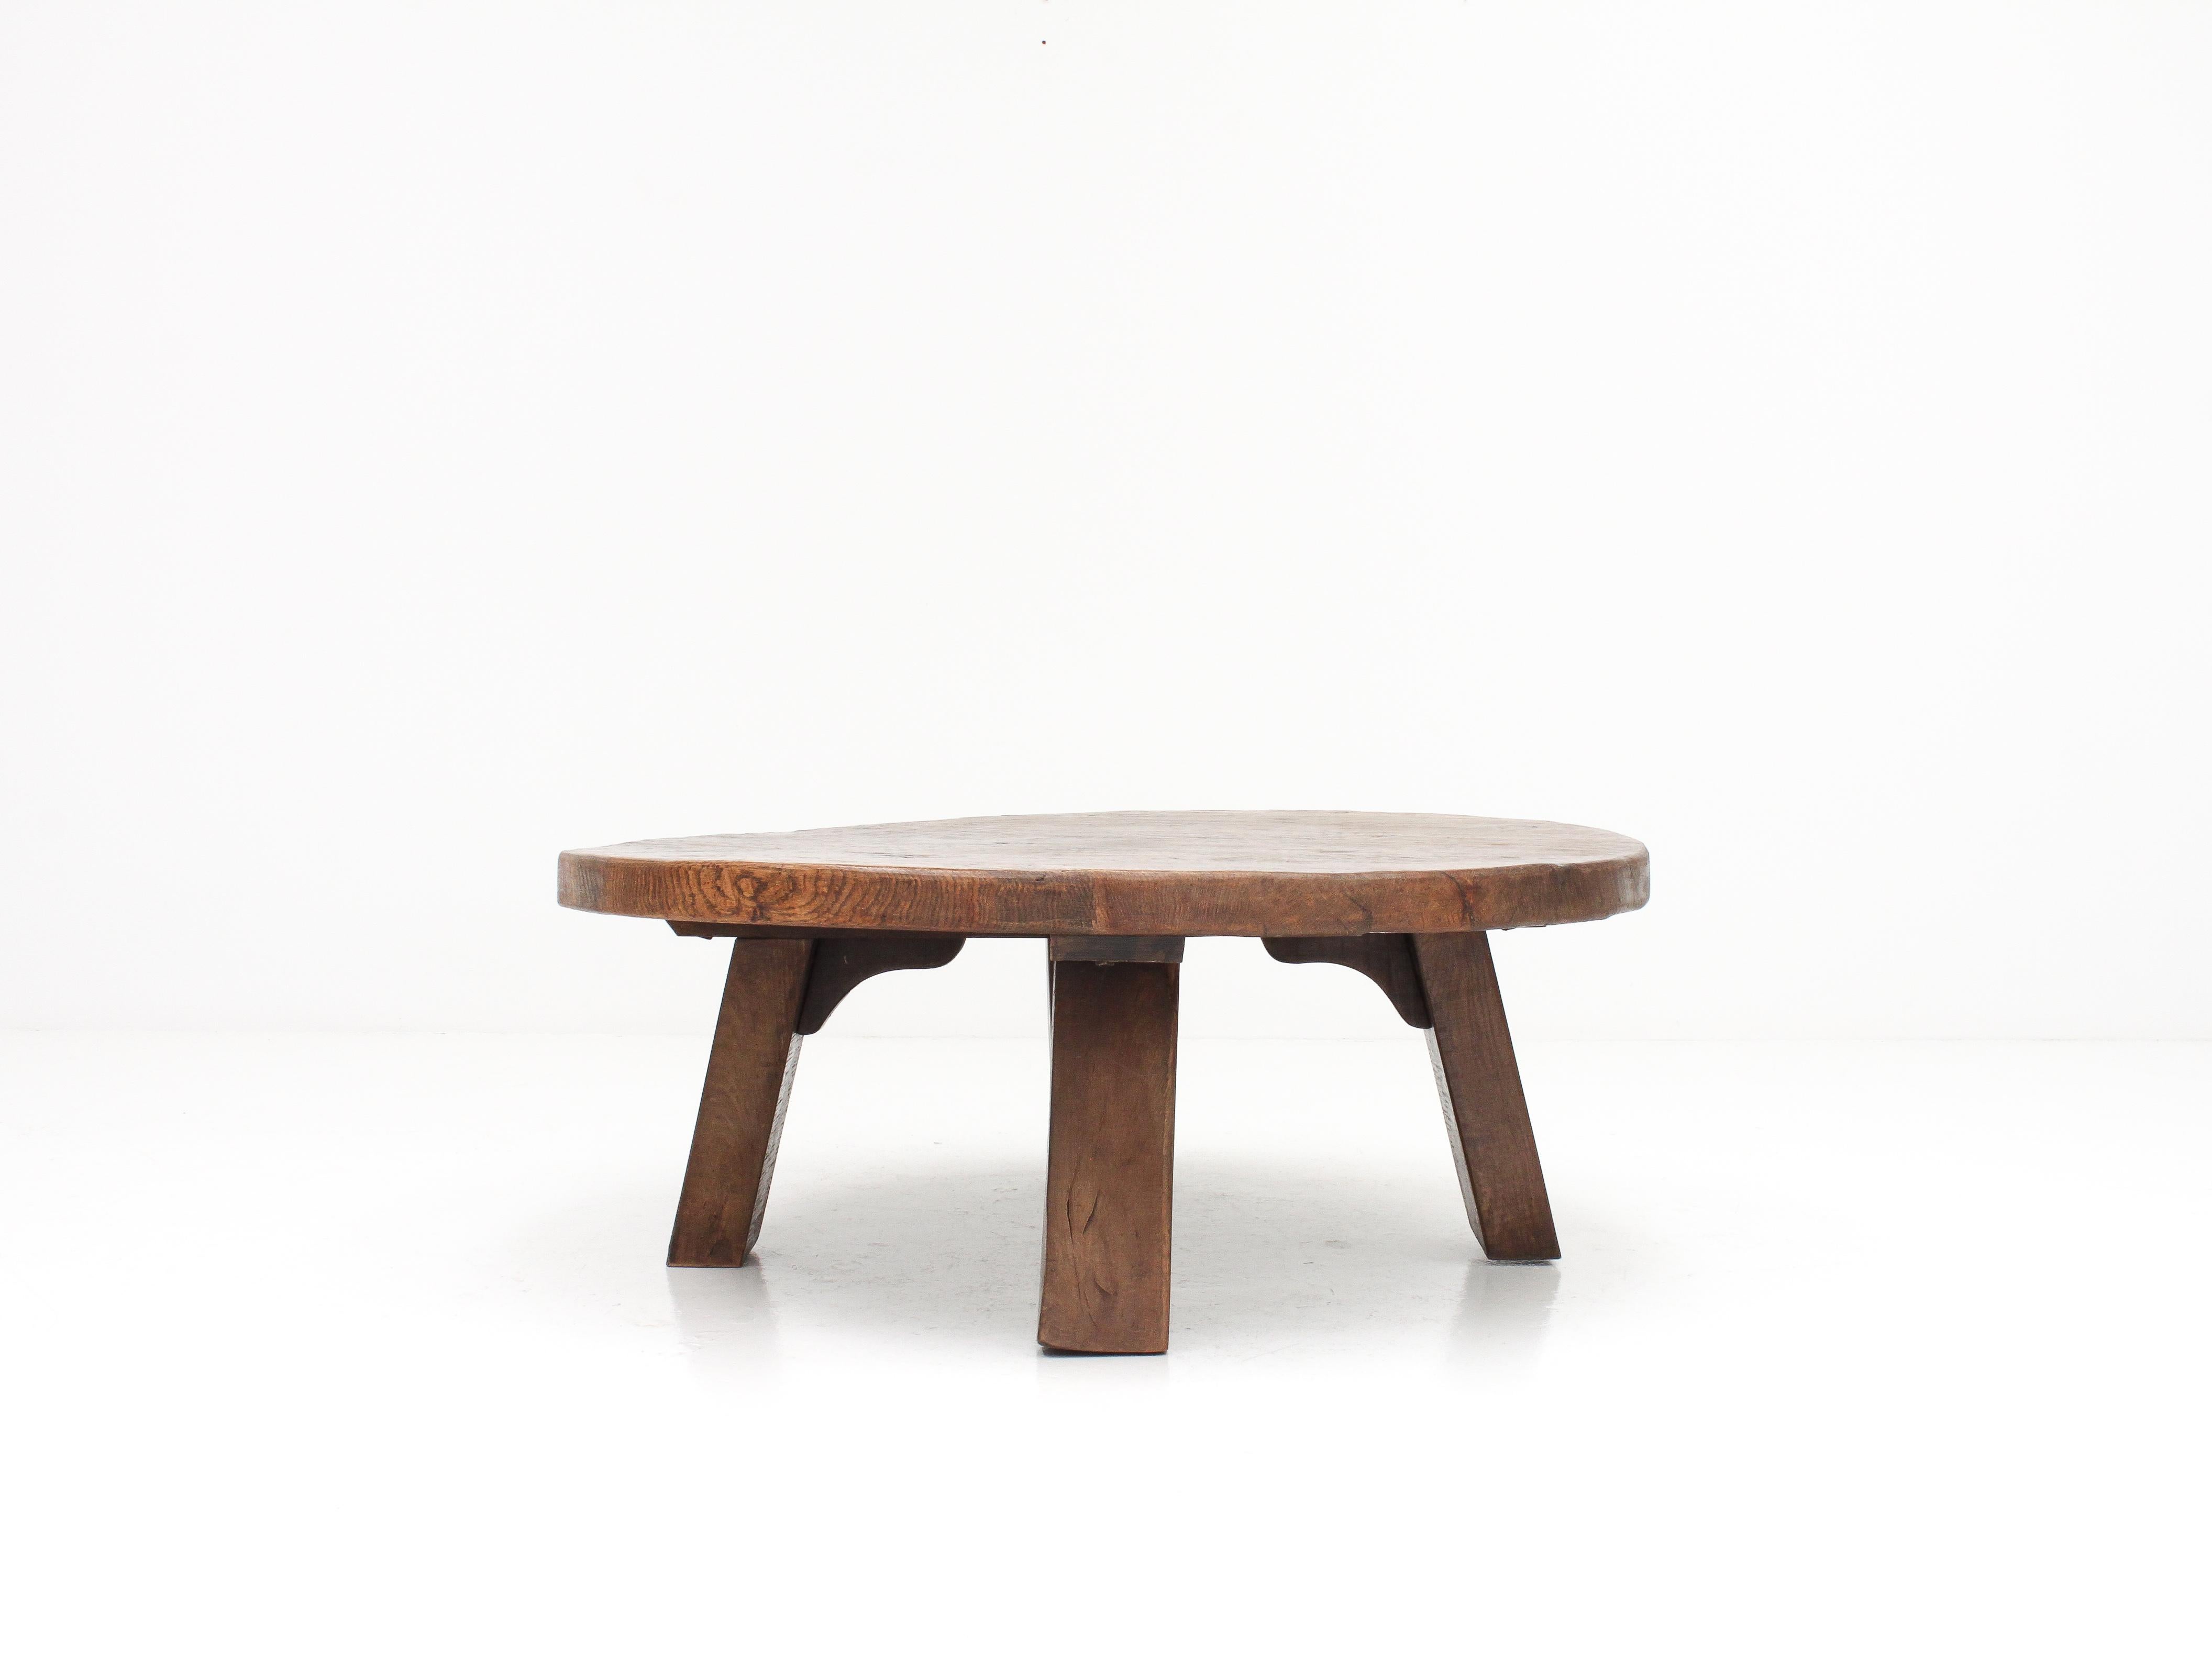 A heavy, solid oak French coffee table dating from the 1960s/70s.

With a brutalist, rustic and primitive aesthetic the table has a strong presence.

The condition is good with only slight imperfections and markings.

We offer fast,